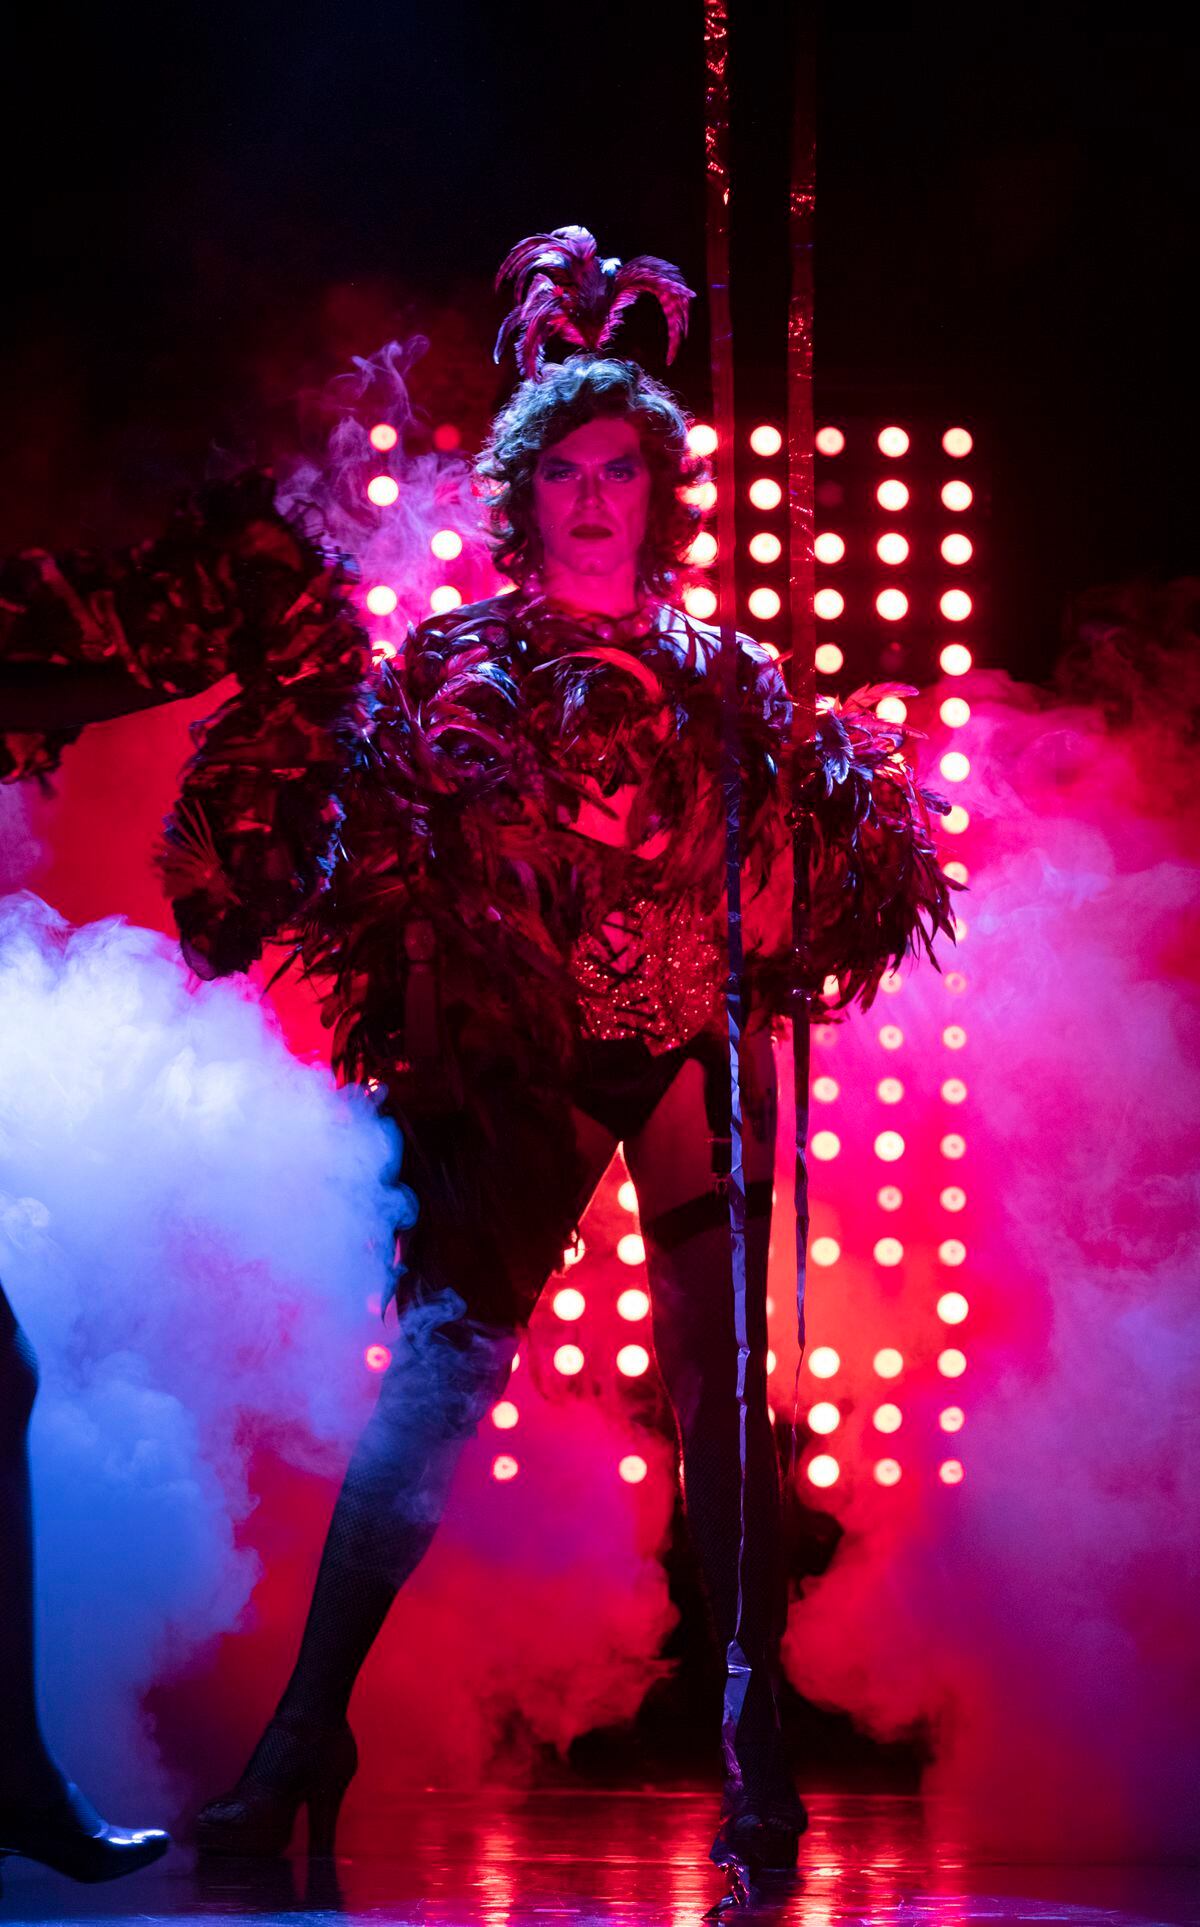 The Rocky Horror Show is coming to Theatre Severn in Shrewsbury.